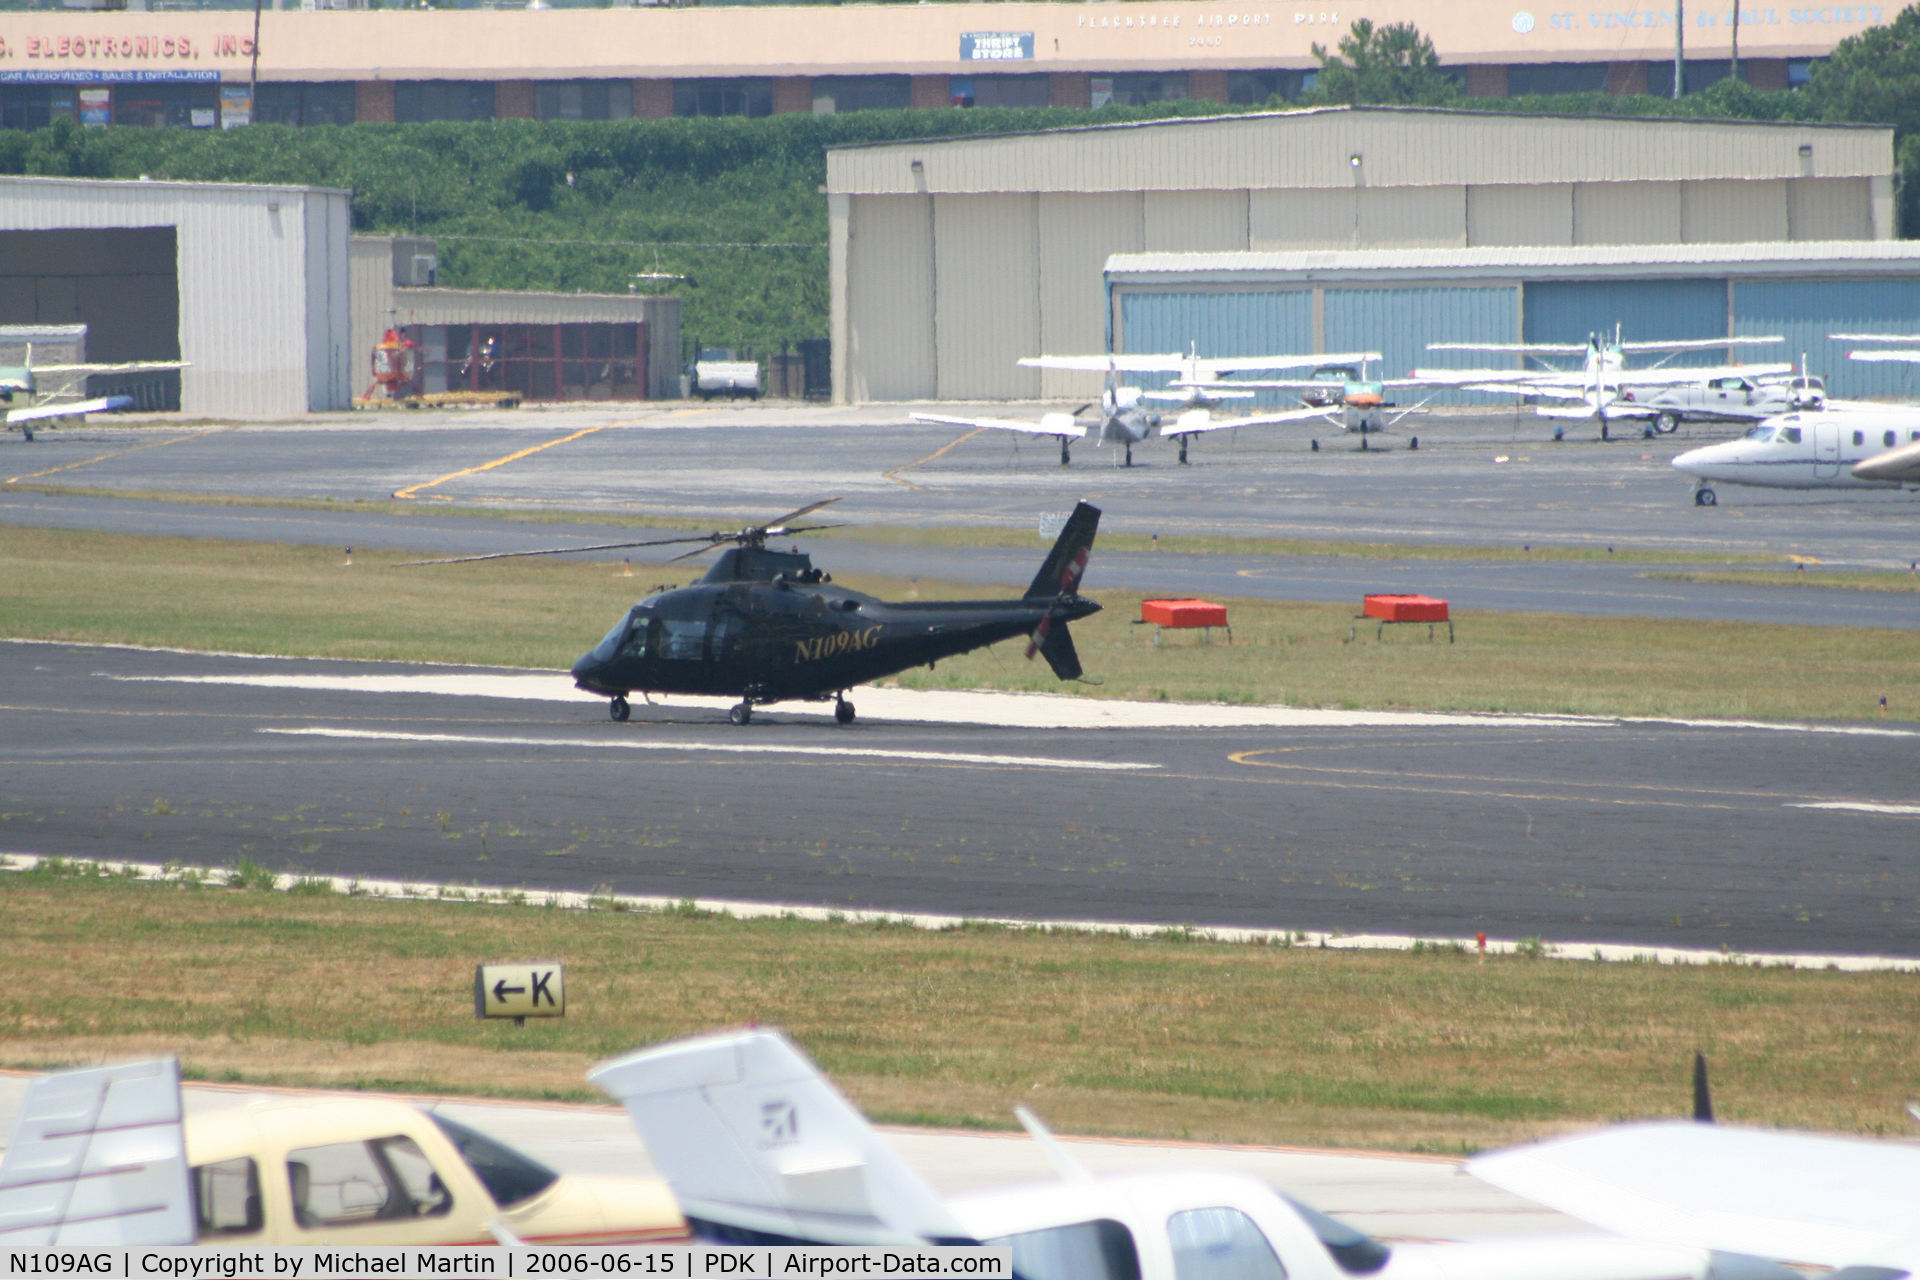 N109AG, 1984 Agusta A109A II C/N 7260, Taxing to Charlie Pad, preparing to take off.